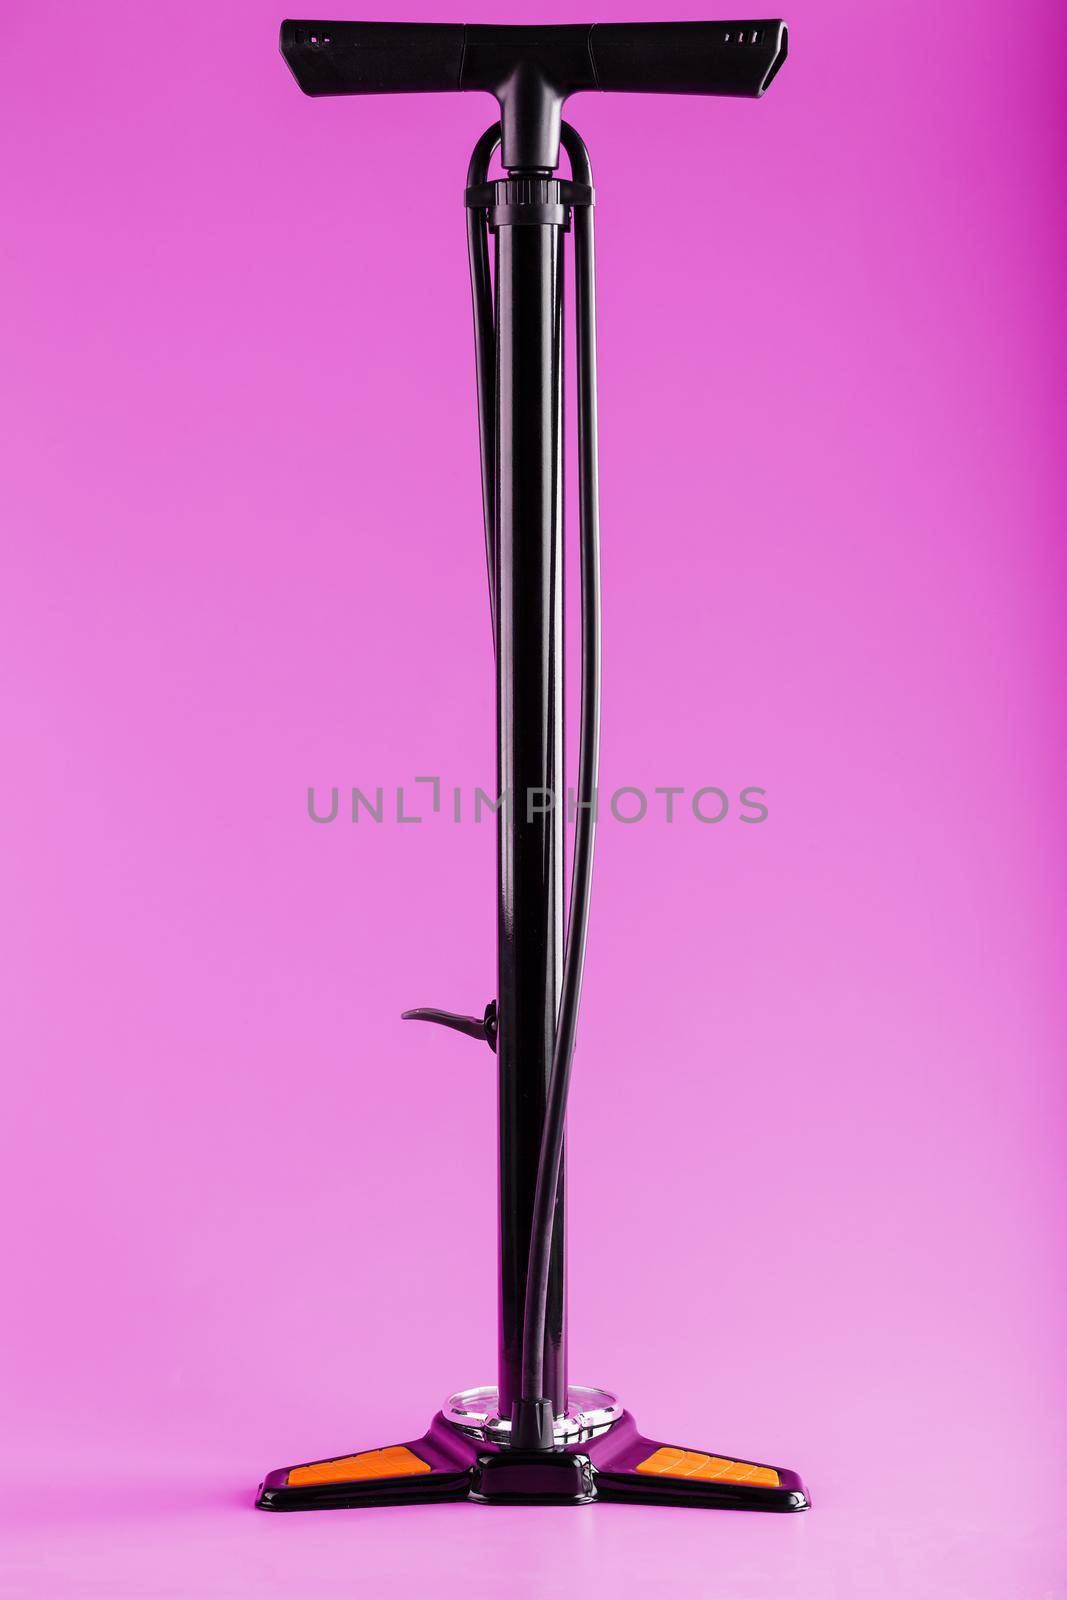 Black bicycle manual air pump for pumping wheels on a pink background with a vertical composition